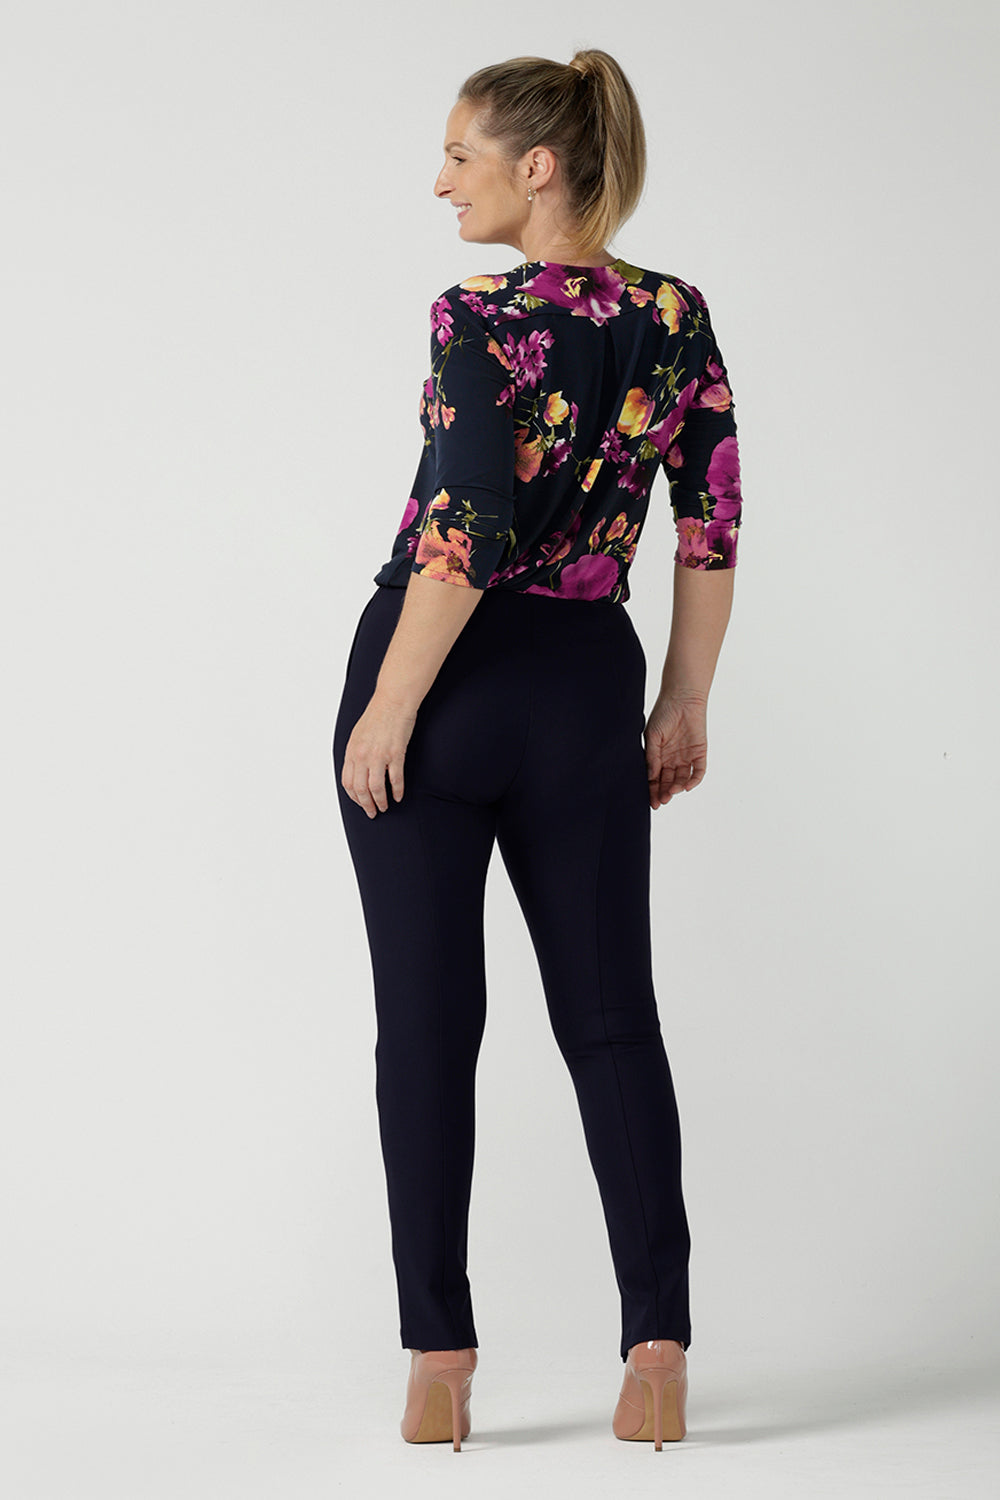 Back view of a size 10 woman wears the Jaime Top in Celeste. A comfortable workwear top that is easy care jersey. Featuring 3/4 sleeves and a v-neckline. Made in Australia and size inclusive. Size 8 - 24. Styled back with the Navy Brooklyn pants.